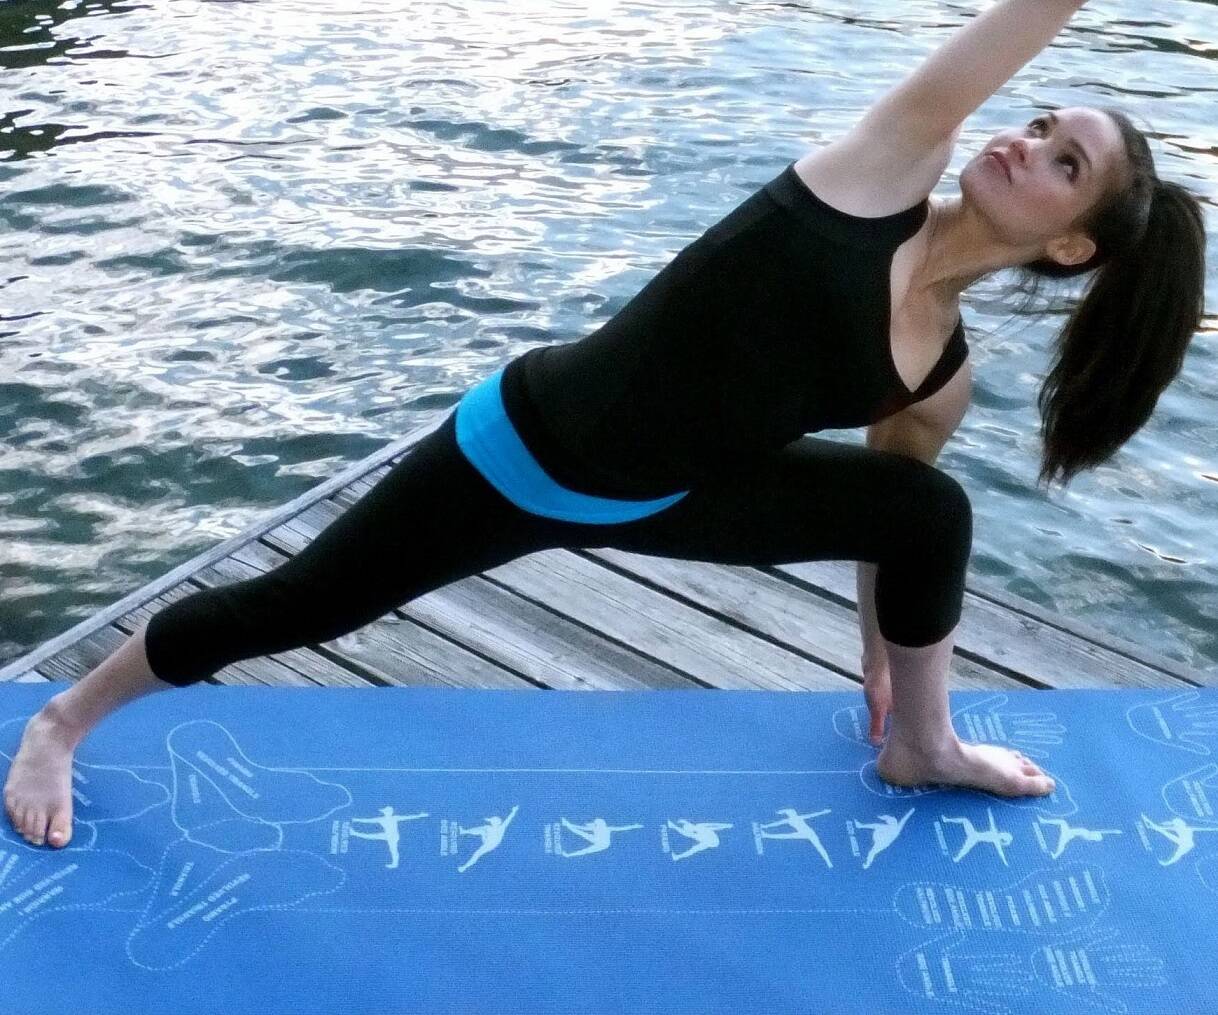 Instructional Yoga Mat - http://coolthings.us